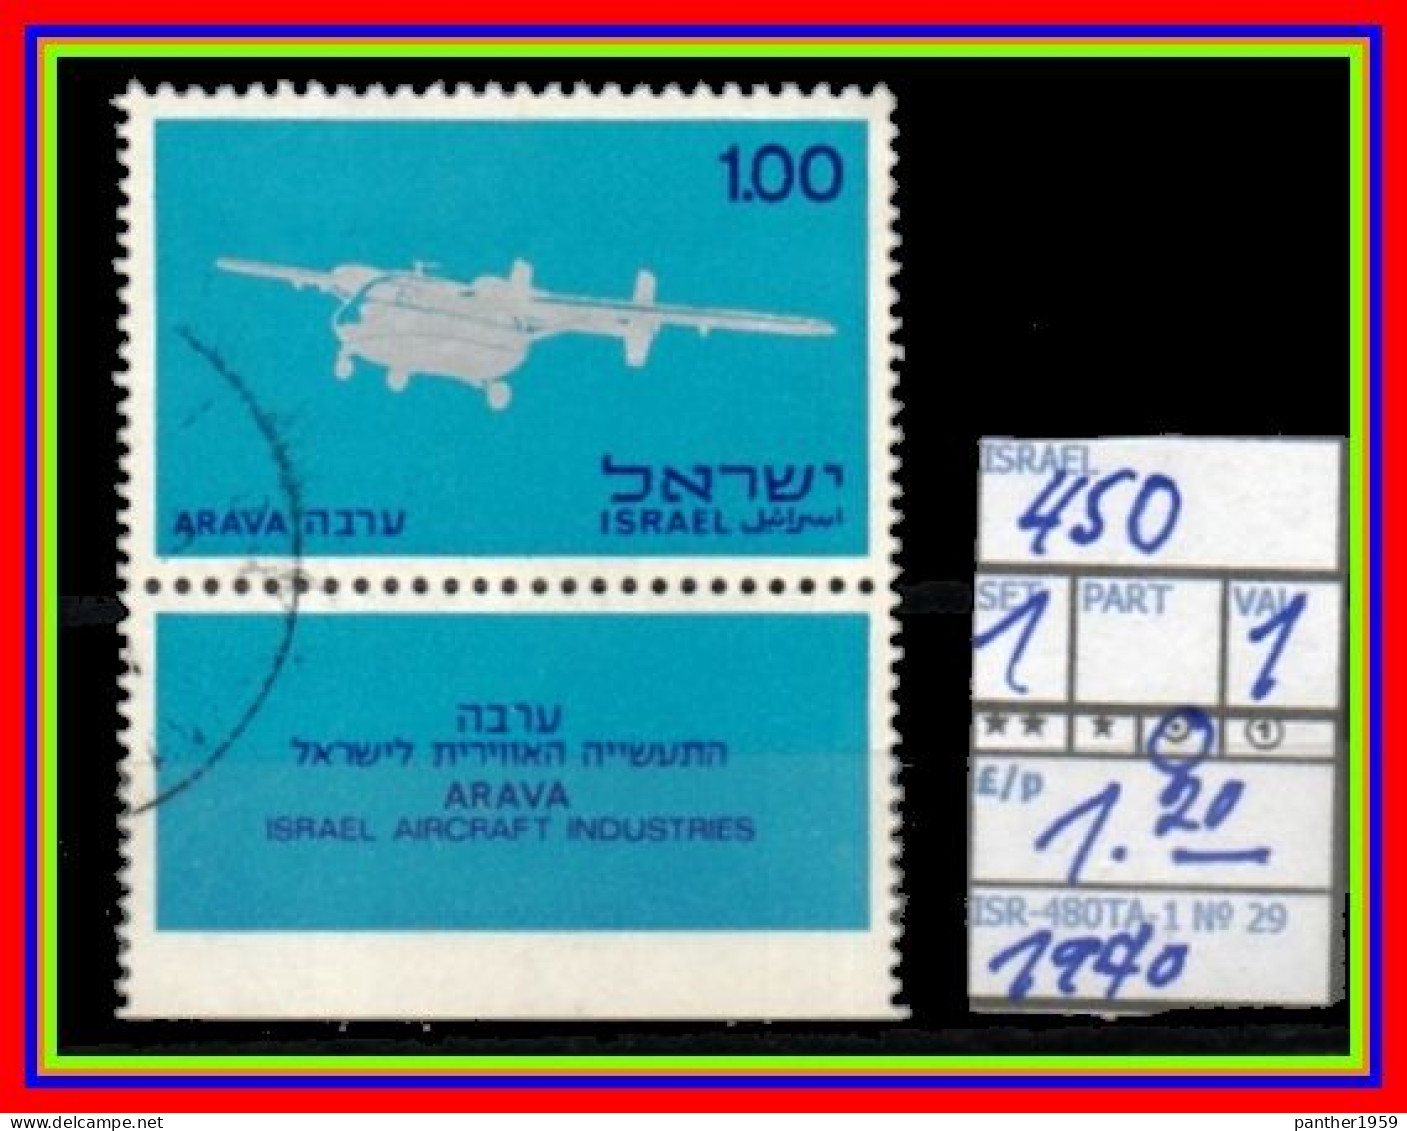 ASIA# ISRAEL# #COMMEMORATIVE SERIES WITH TABS# USED# (ISR-280TA-1) (29) - Usados (con Tab)